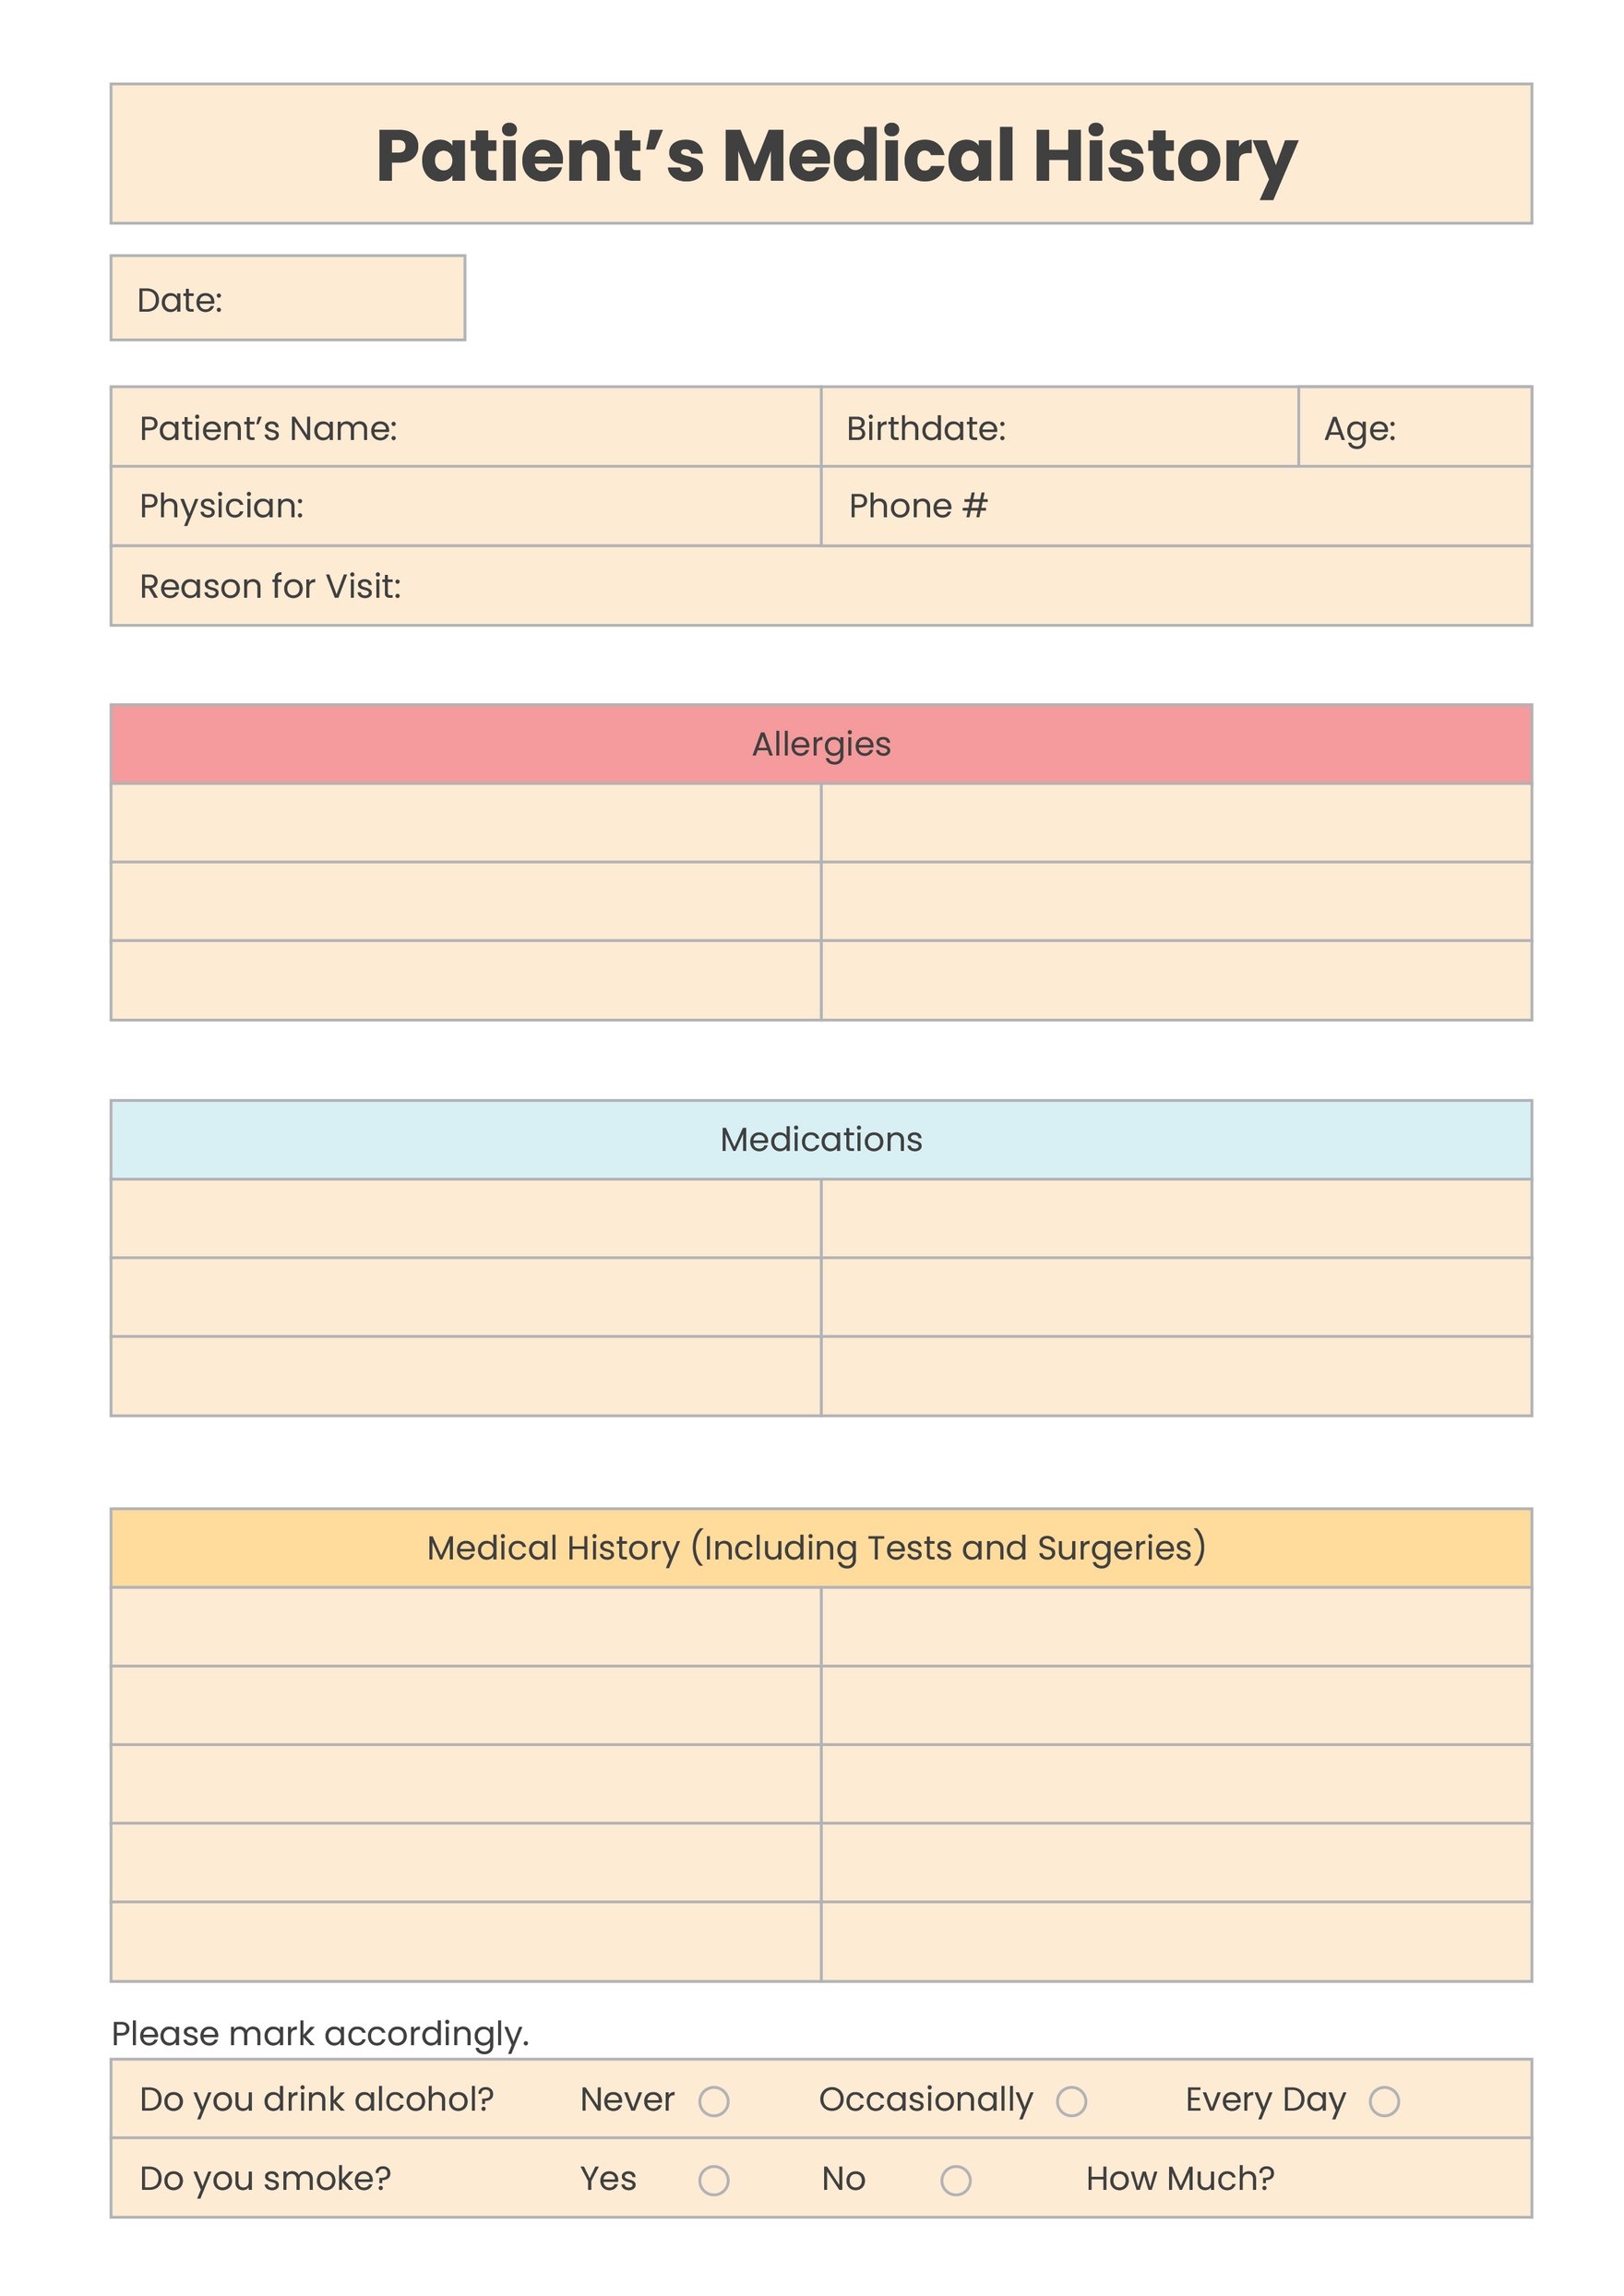 Free Blank Patient Chart Download in PDF, Illustrator